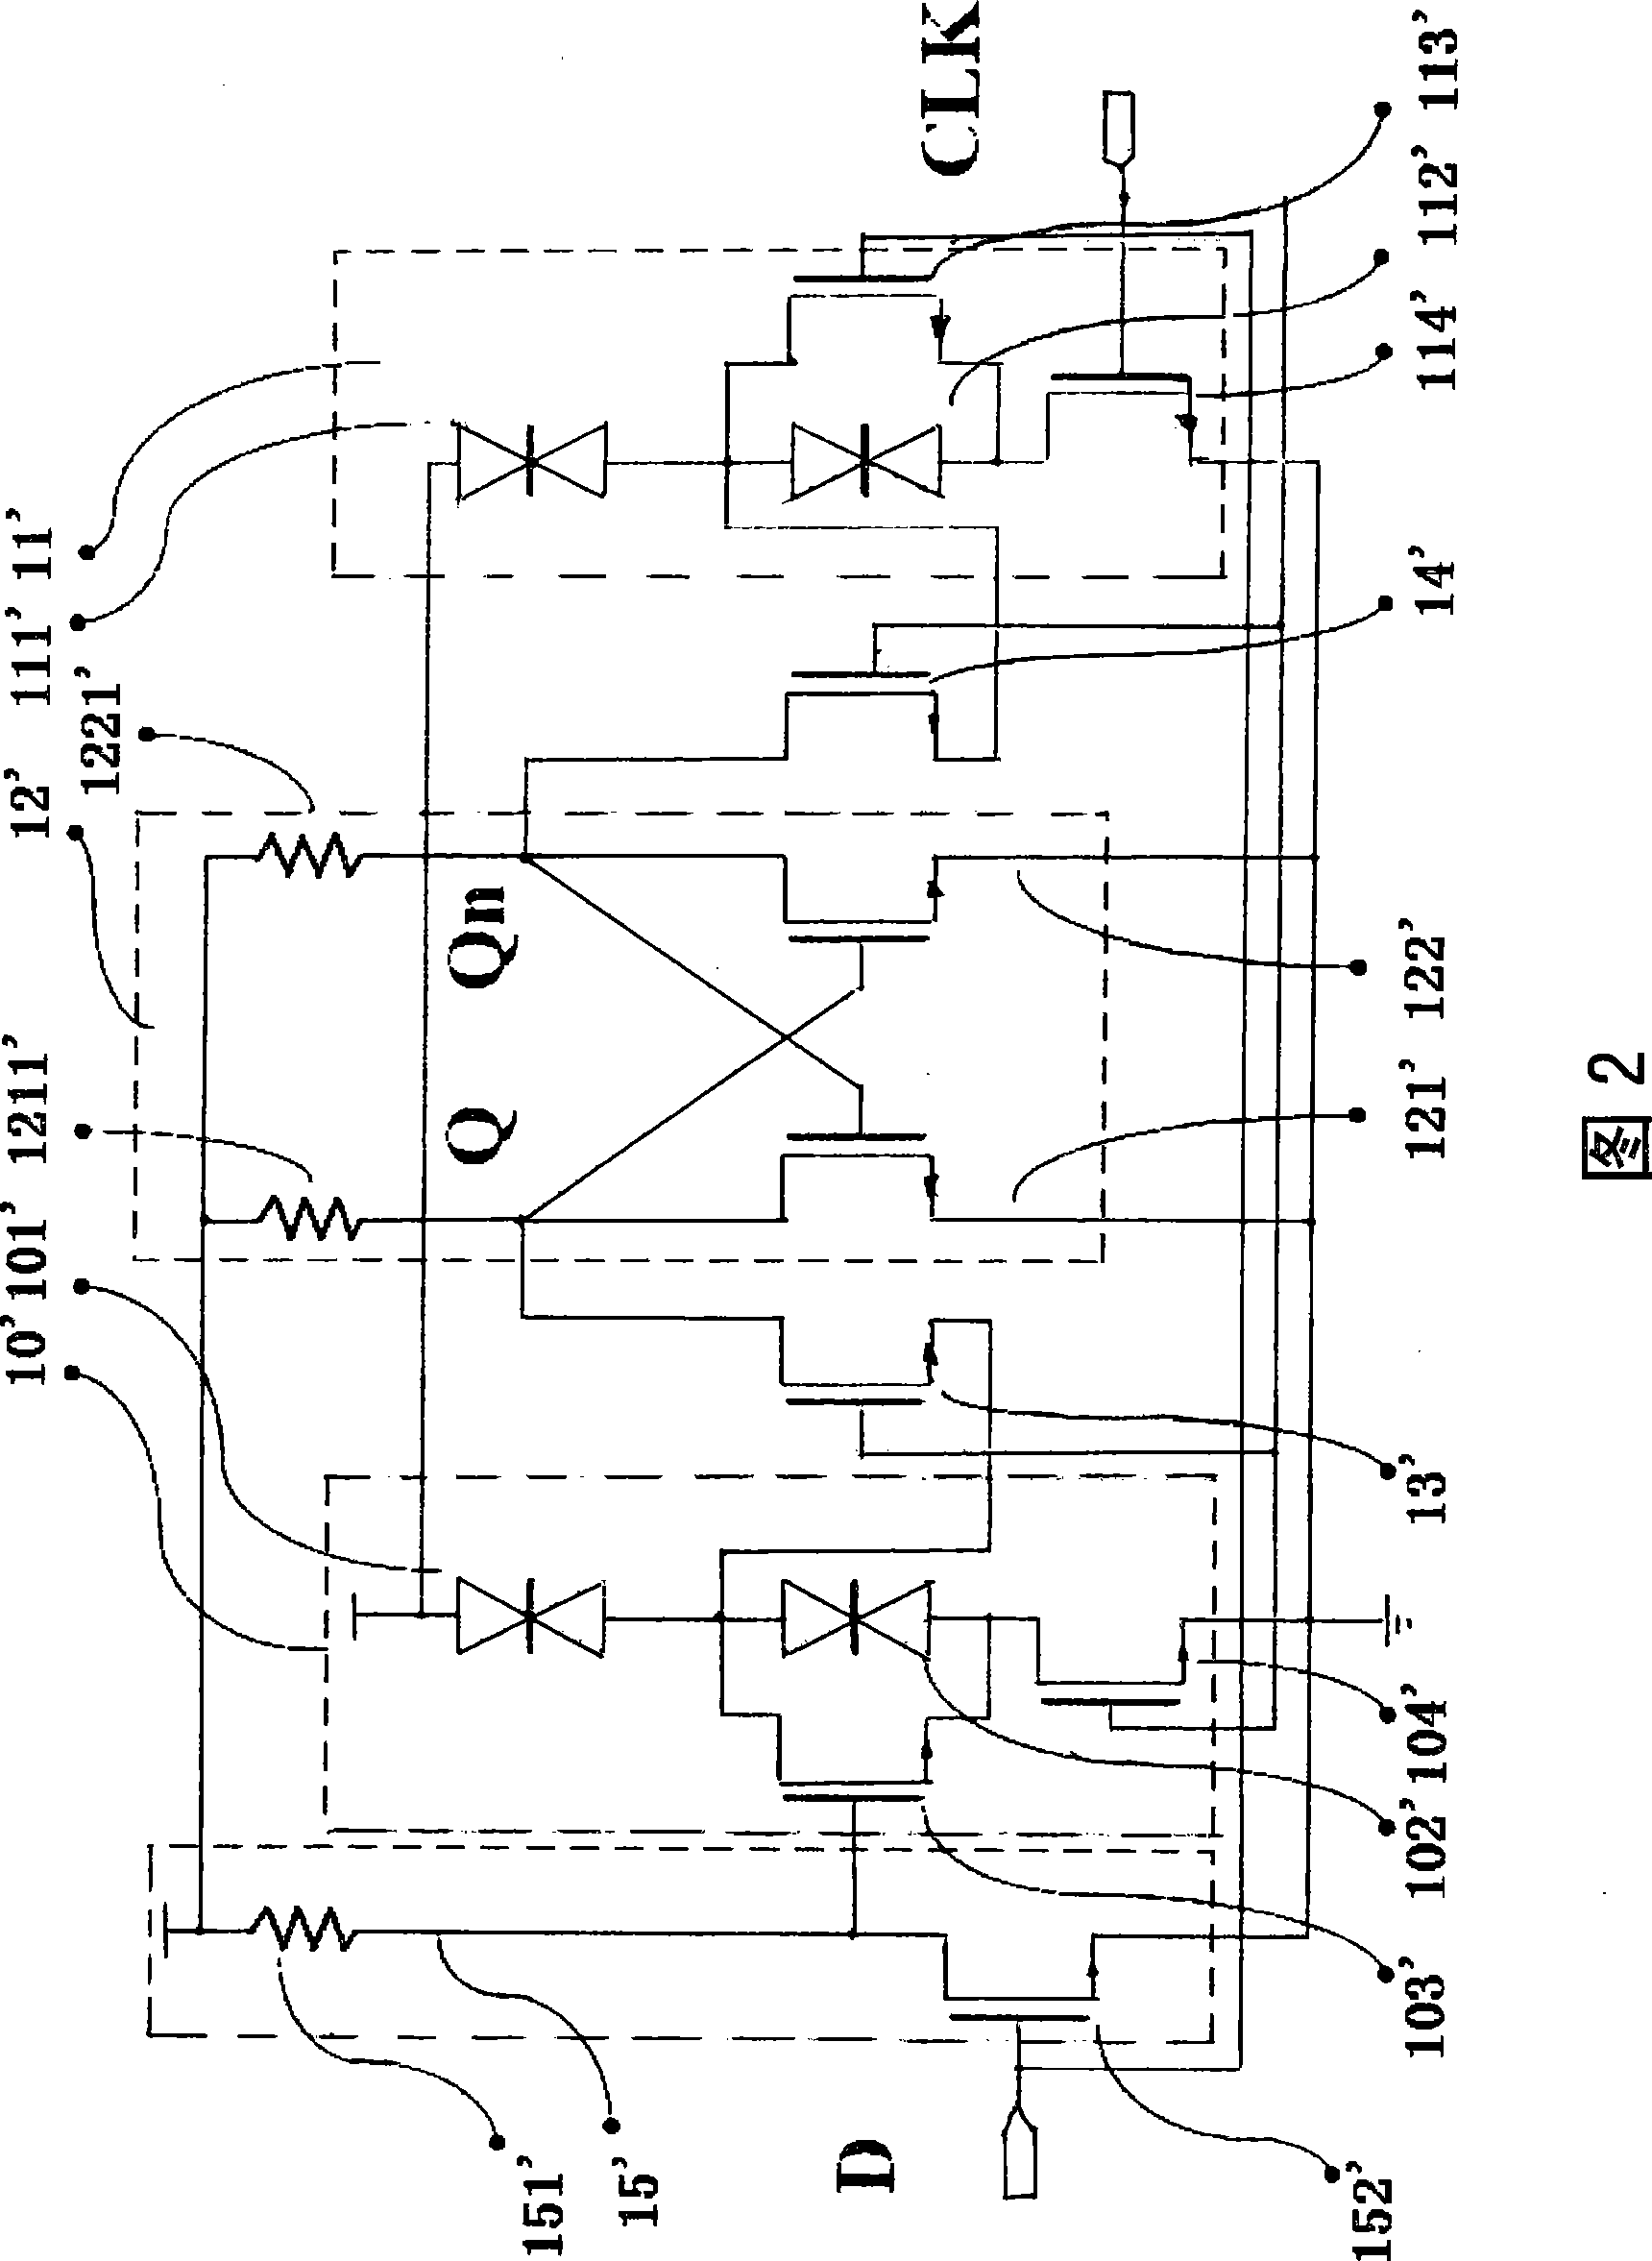 D trigger for resonance tunnel-through diode